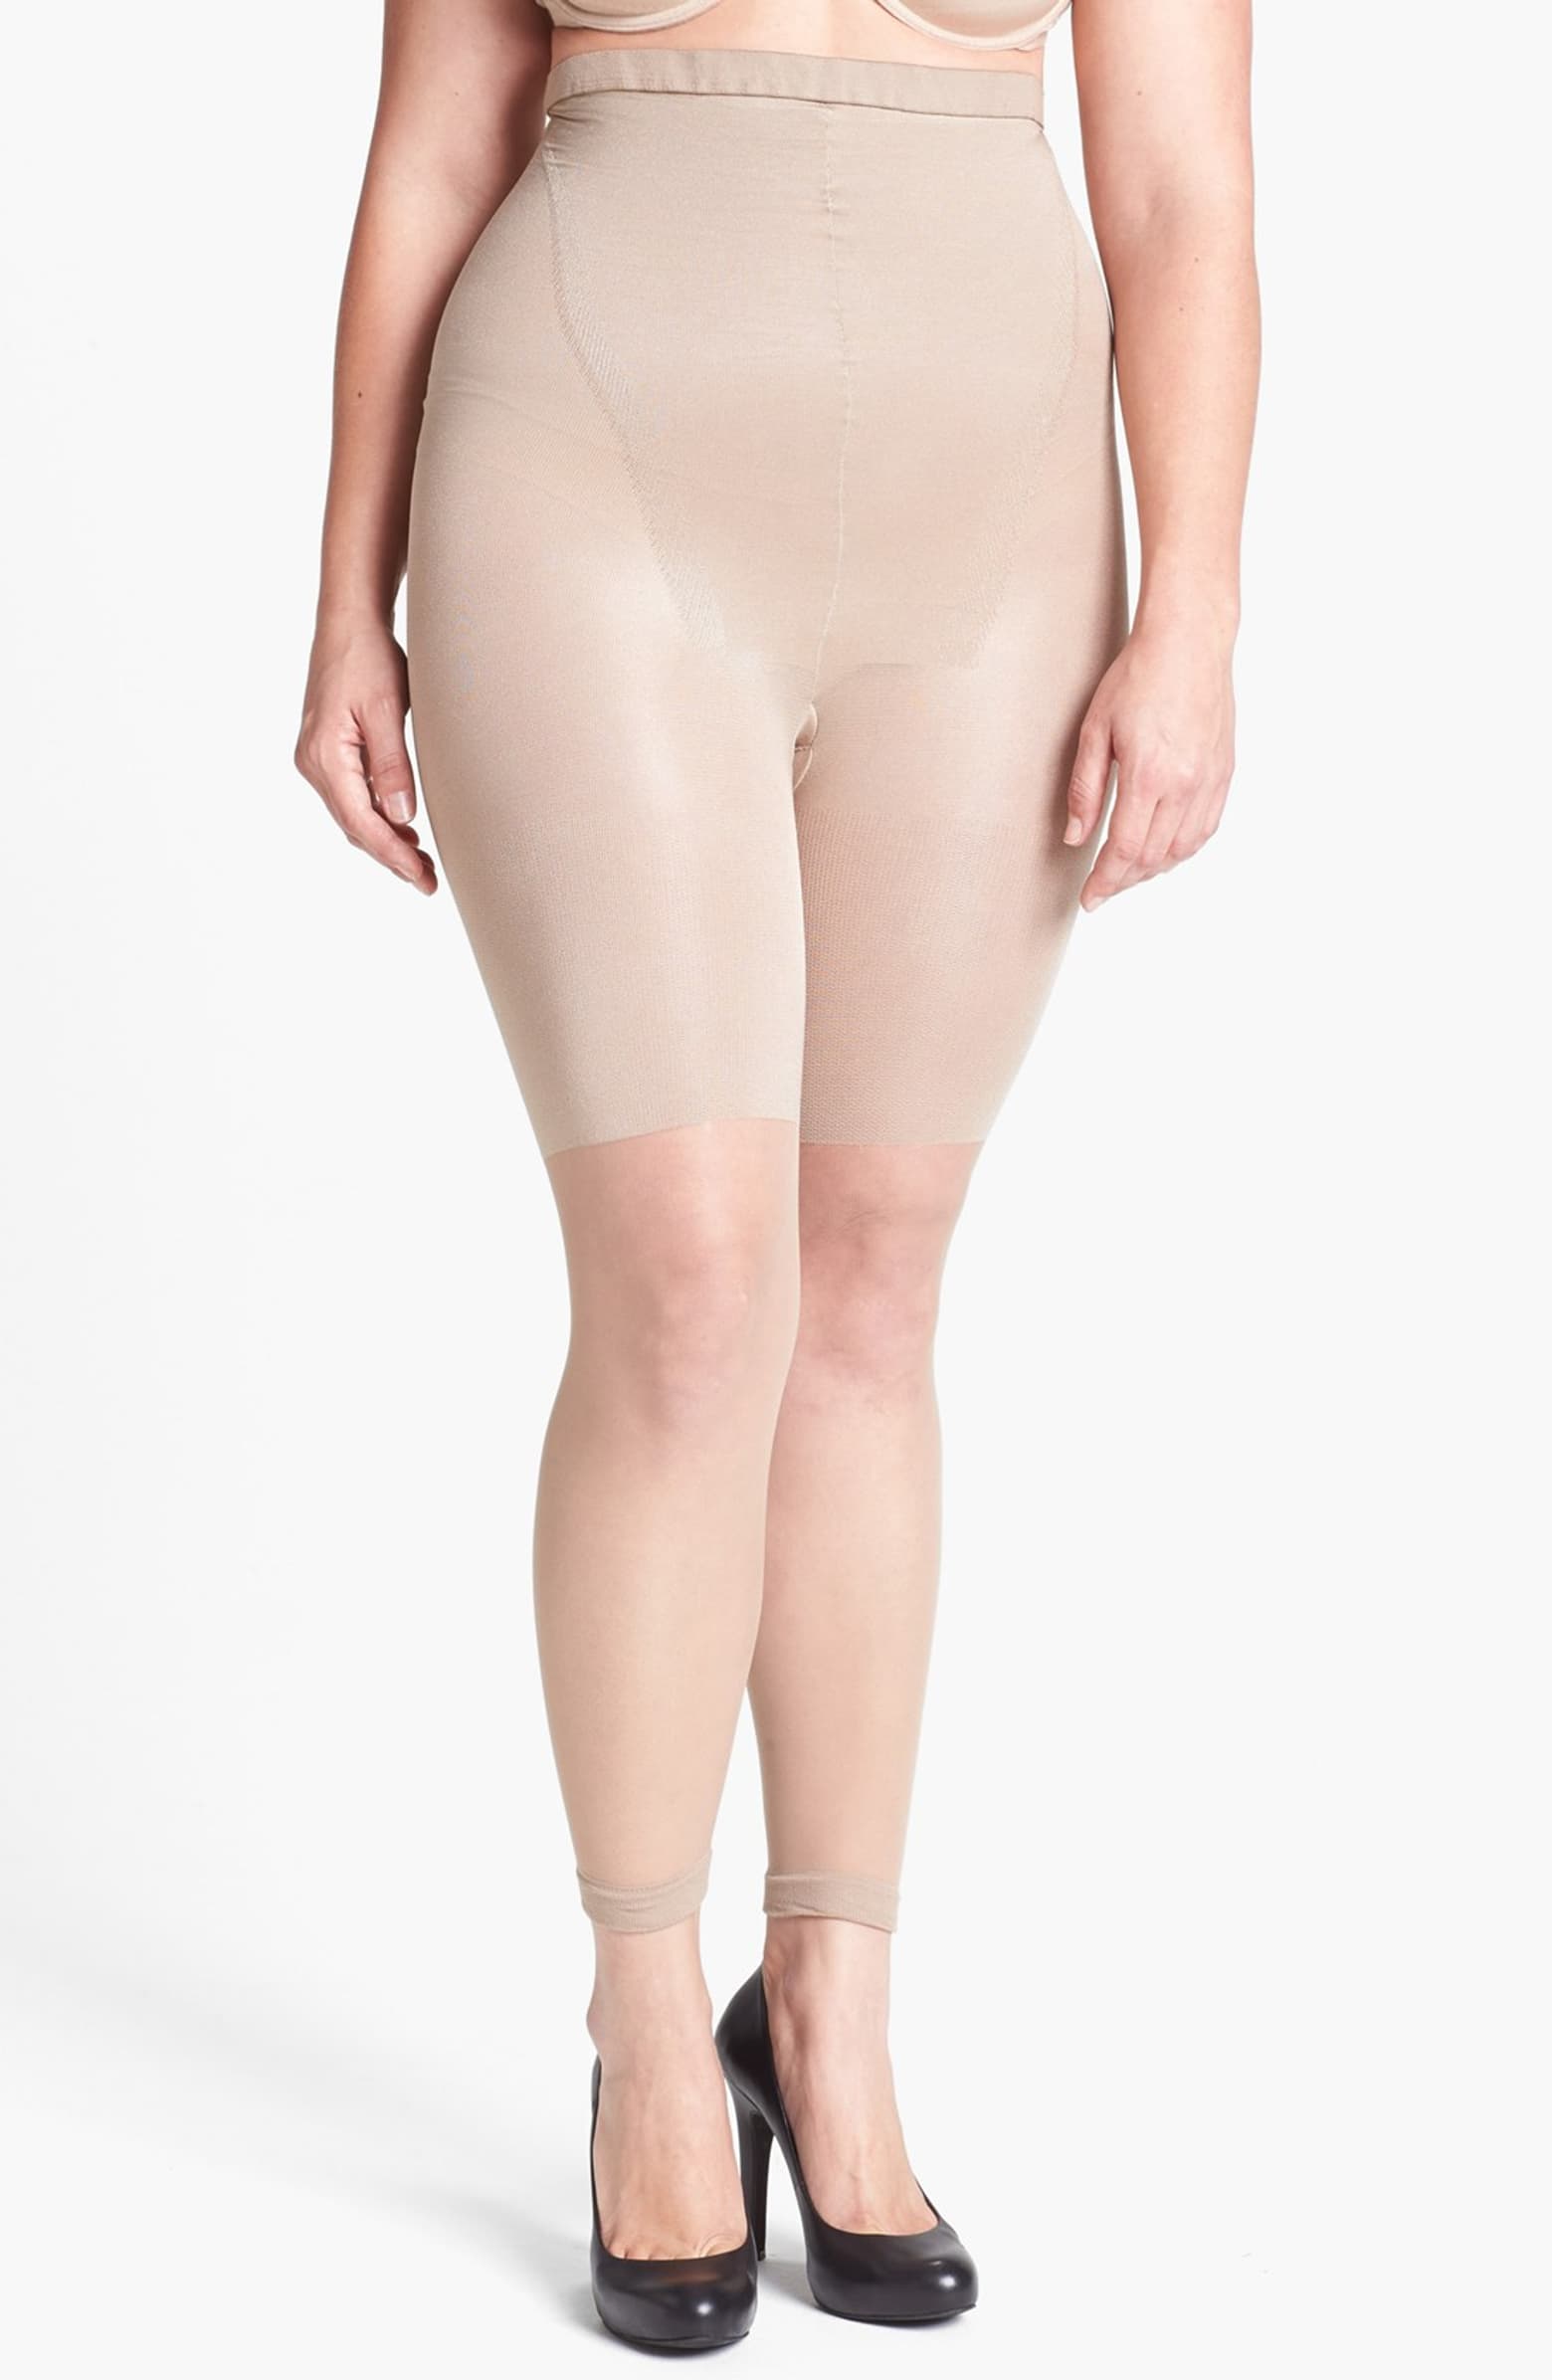 The Only 4 Items Your Shapewear Collection Requires Via @GirlWithCurves #footless Legging